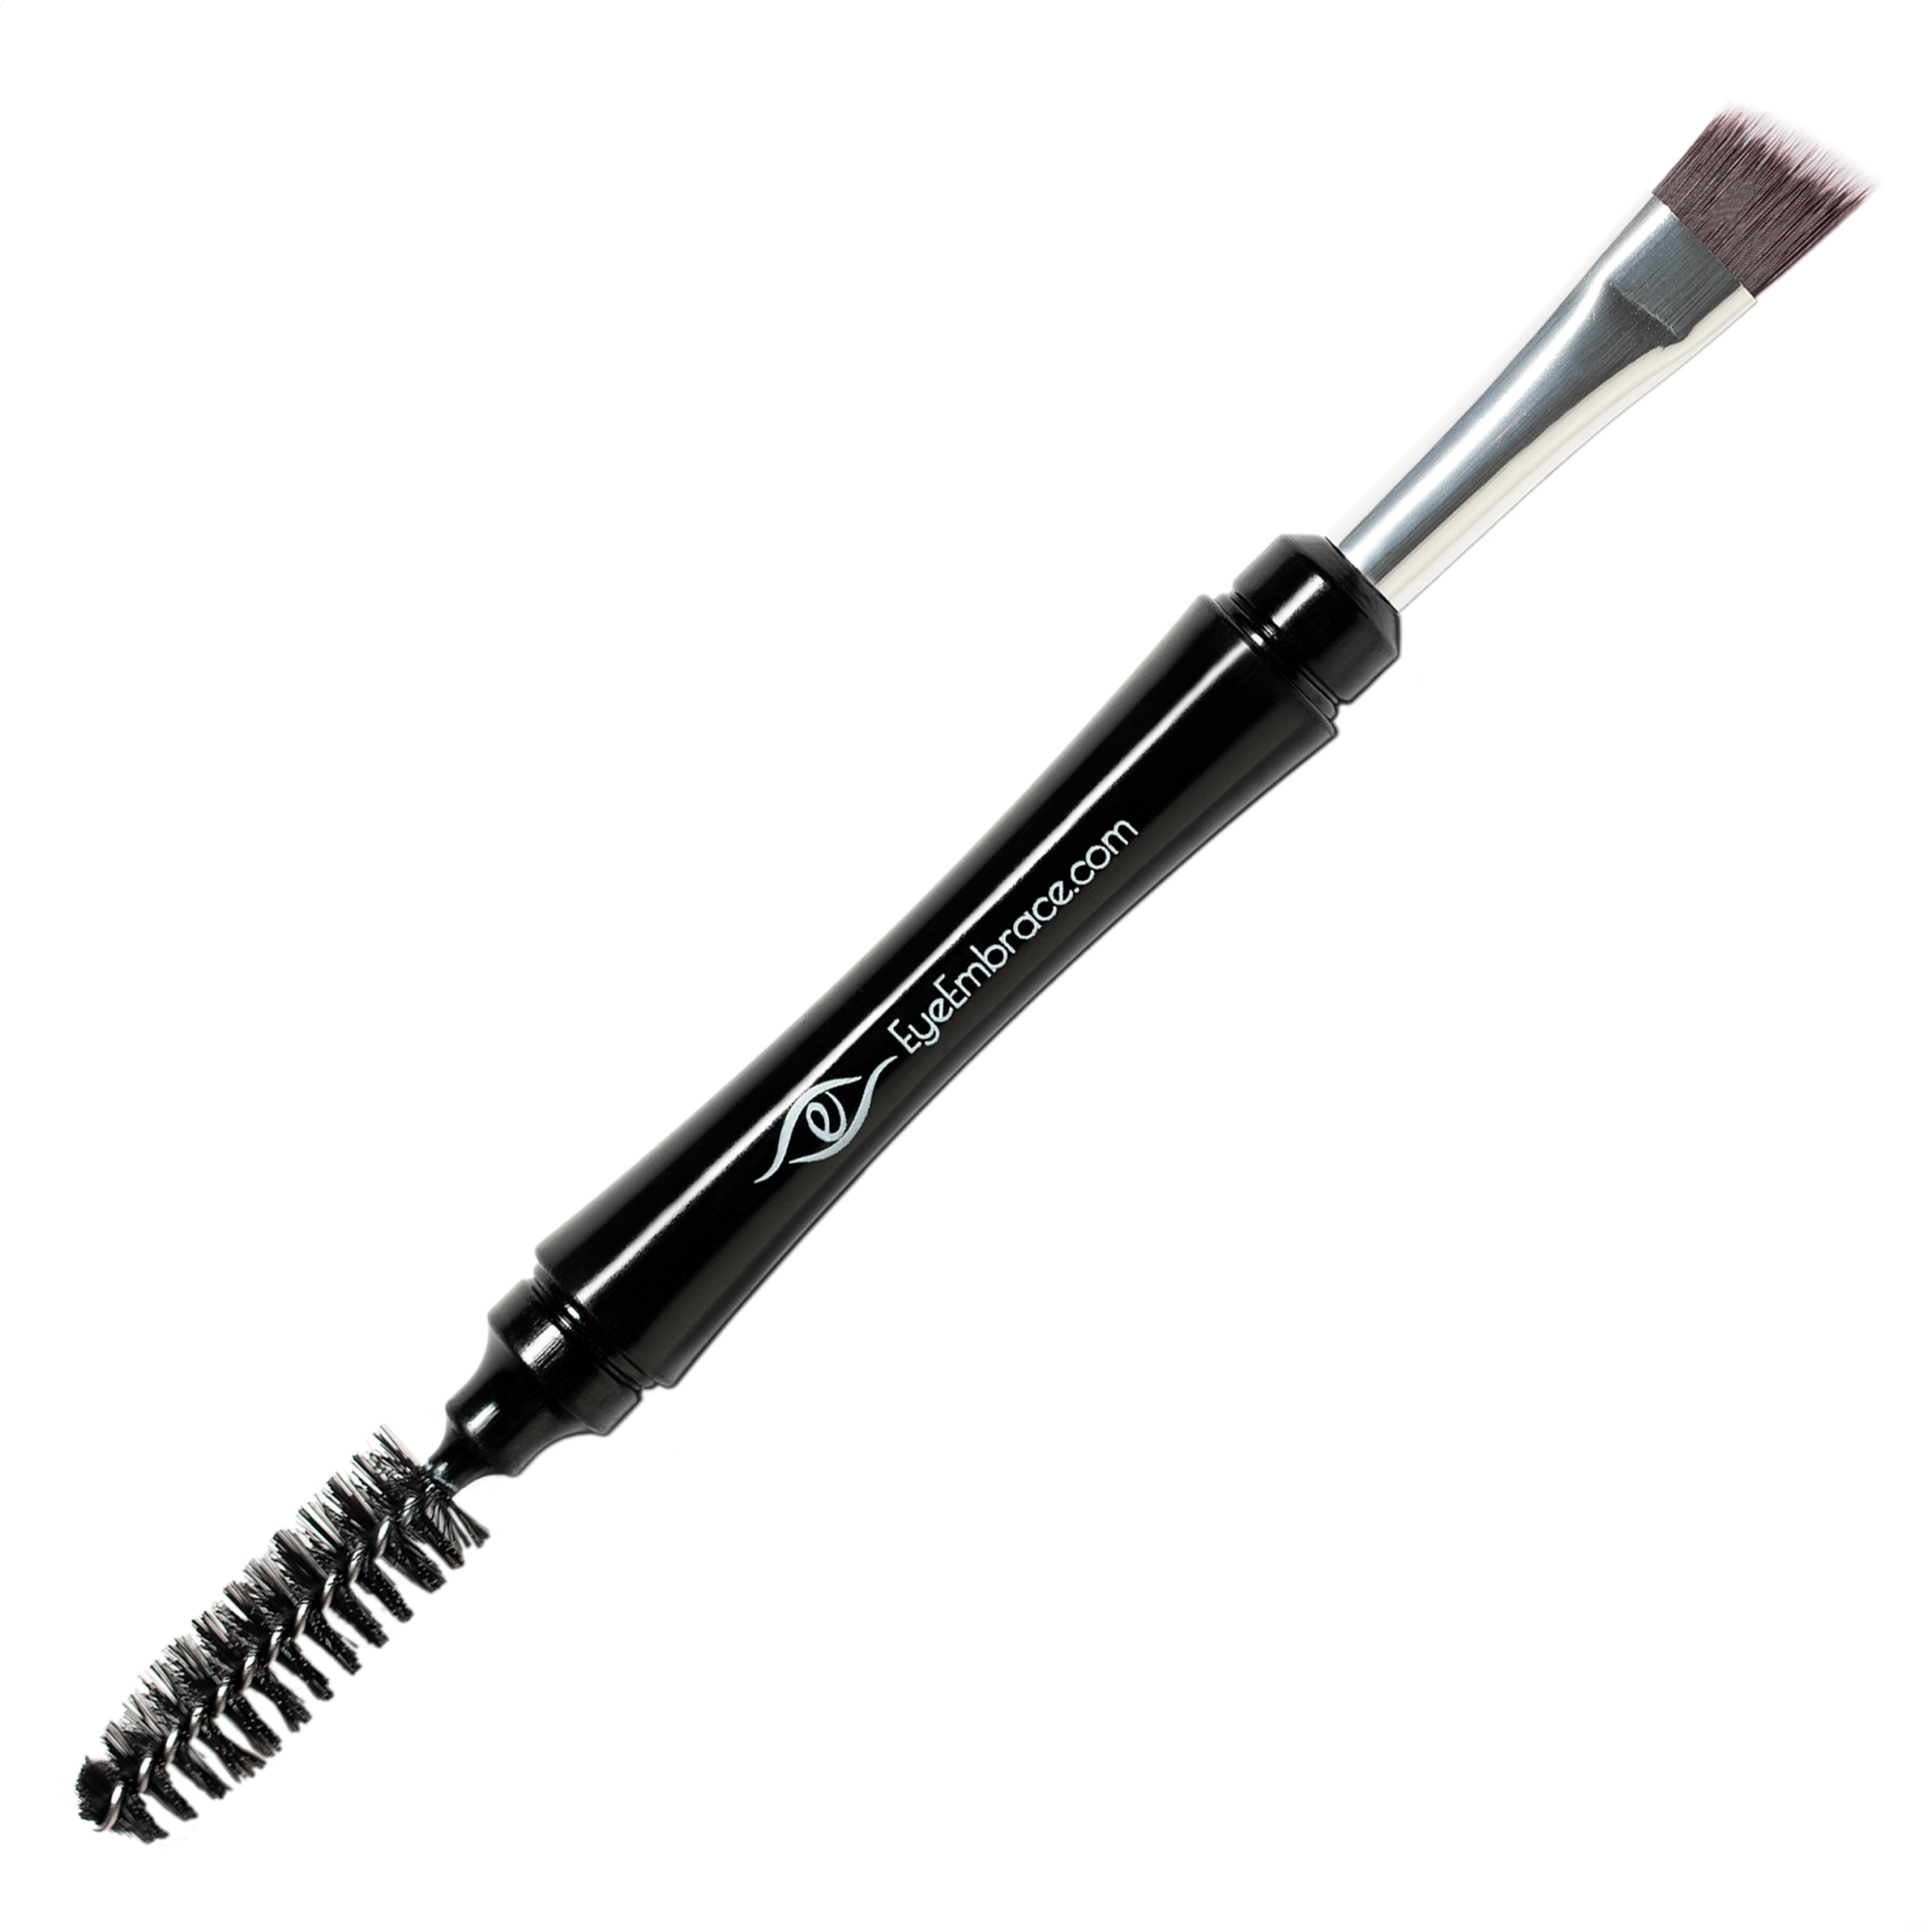 Pro Grip Double-Ended Angled Makeup Brush with Spoolie – Eye Embrace